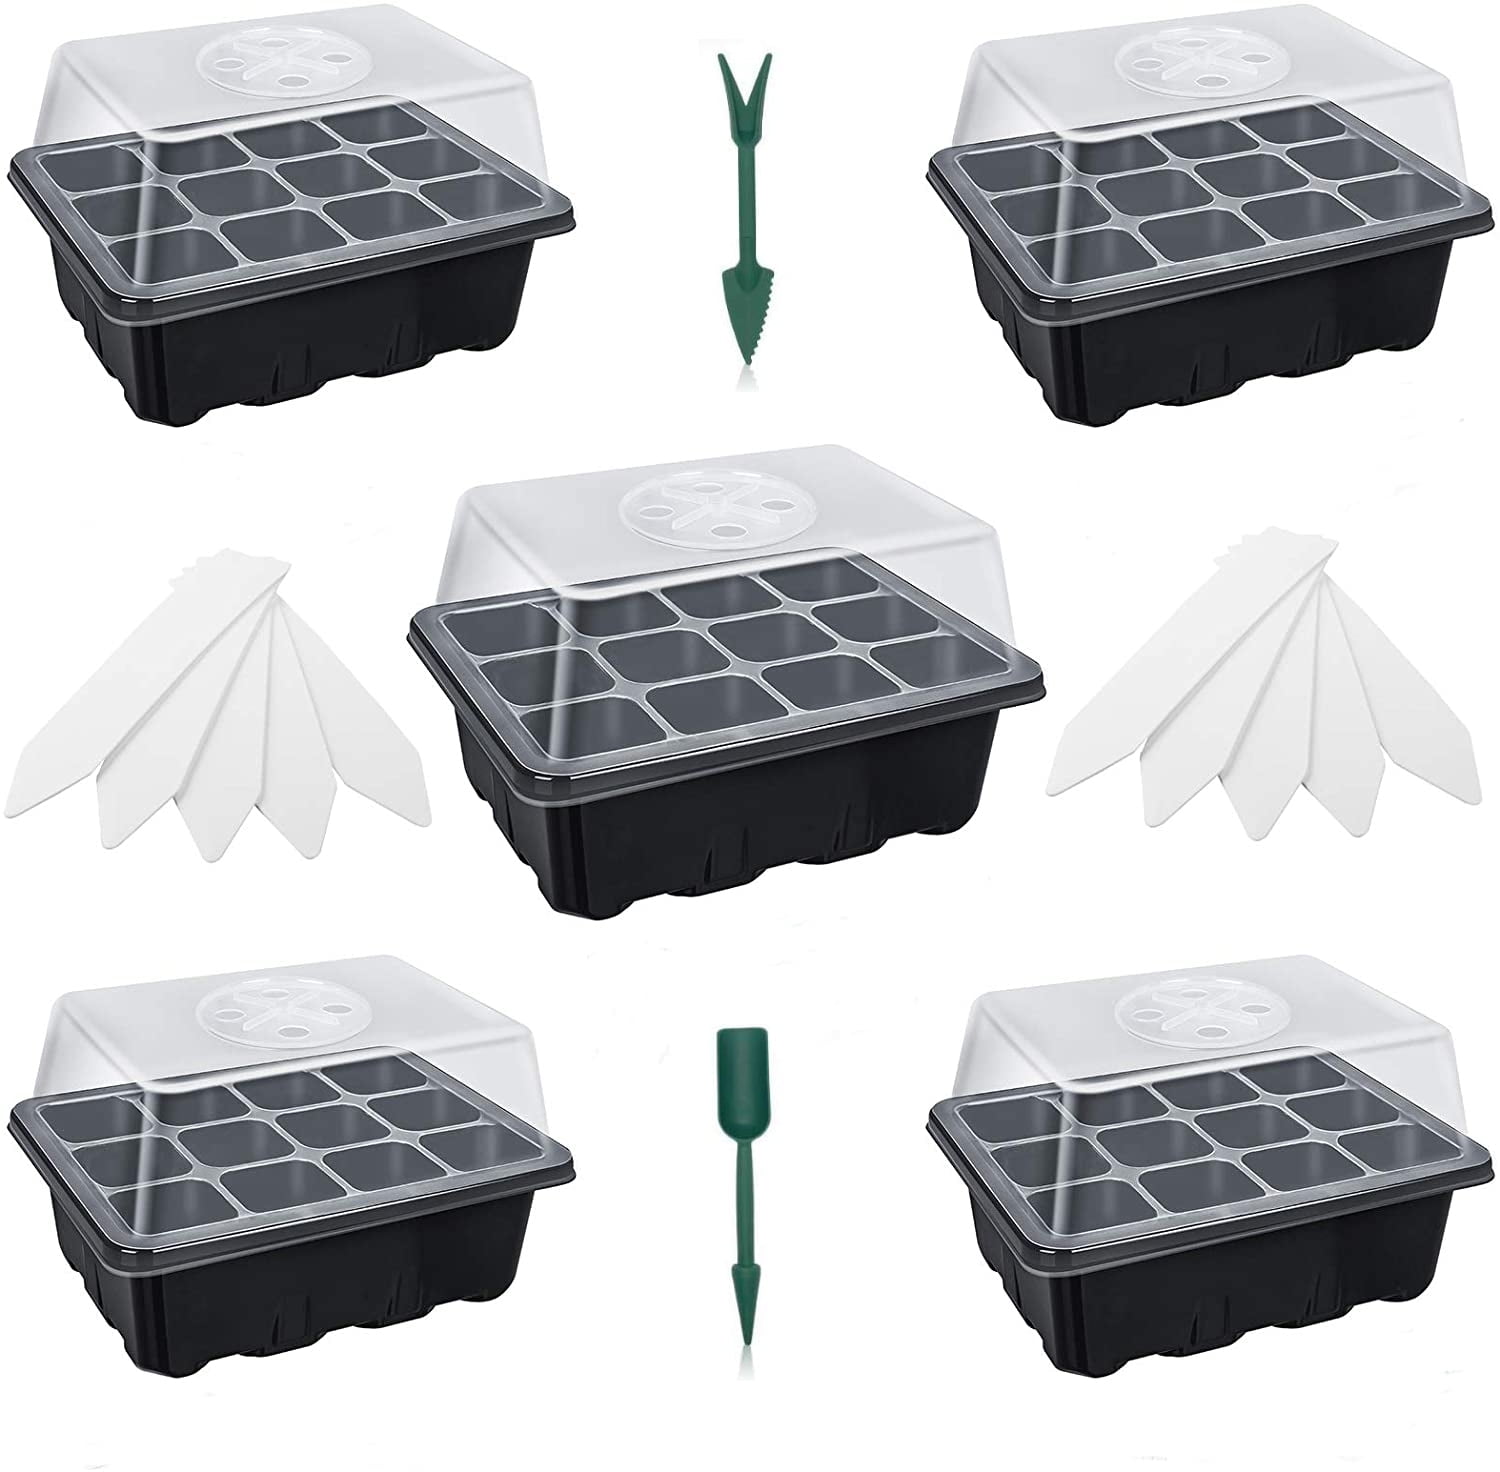 1pc Green Seedling Trays, Sprout Vegetable Trays, Plastic Garden Seedling  Trays, Plant Starter Kit With Adjustable Humidity Dome And Base, Indoor Gree